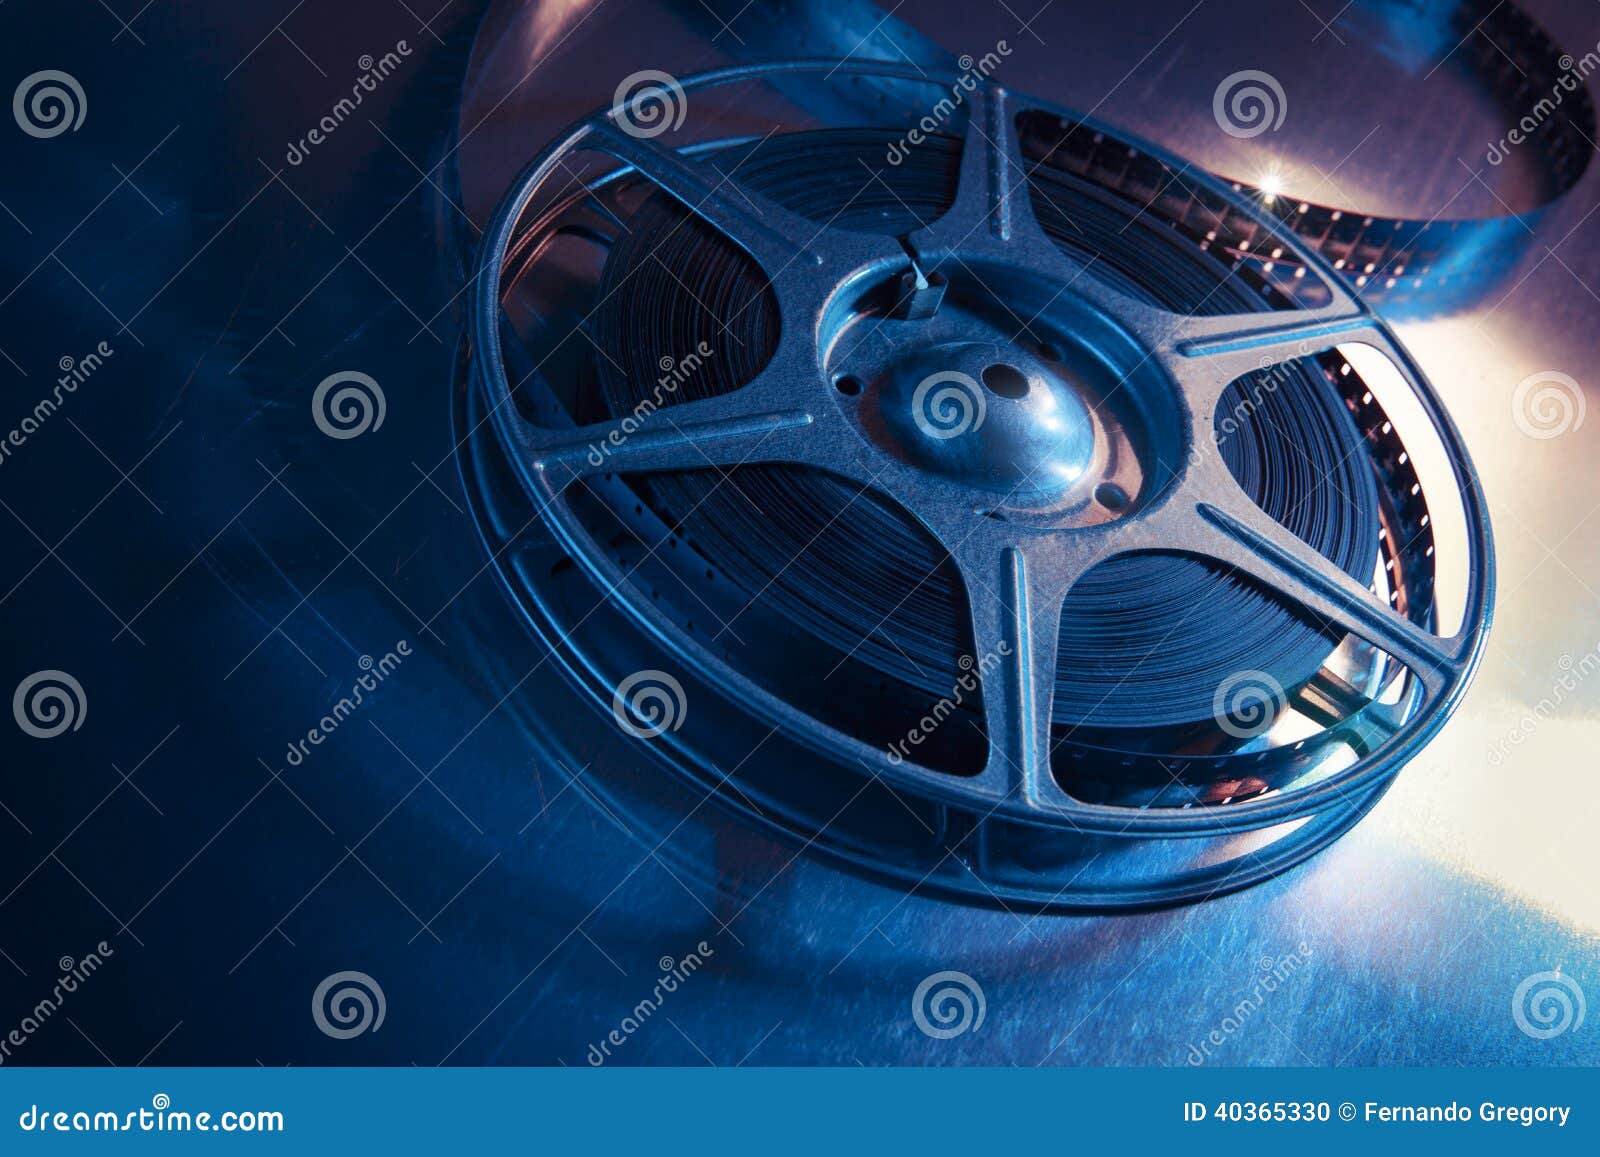 dramatic lit image of a movie reel